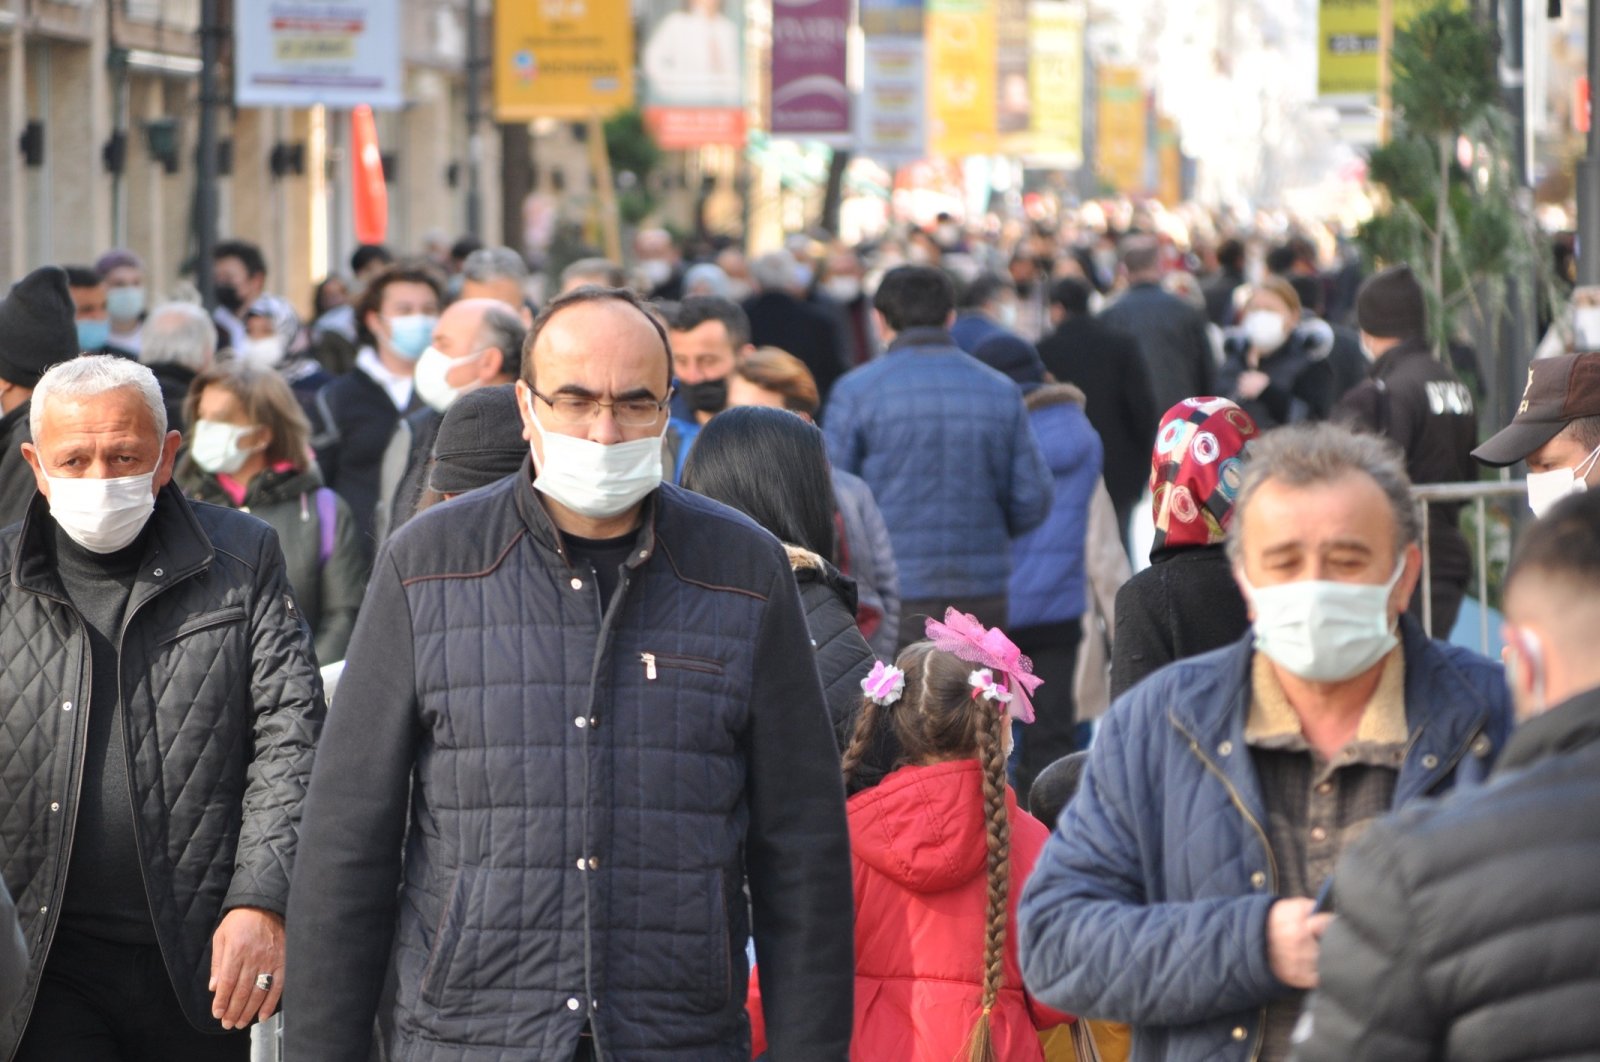 People wearing protective masks walk on a street in Ordu, the province with the highest prevalence of COVID-cases, northern Turkey, March 2, 2021. (DHA PHOTO)